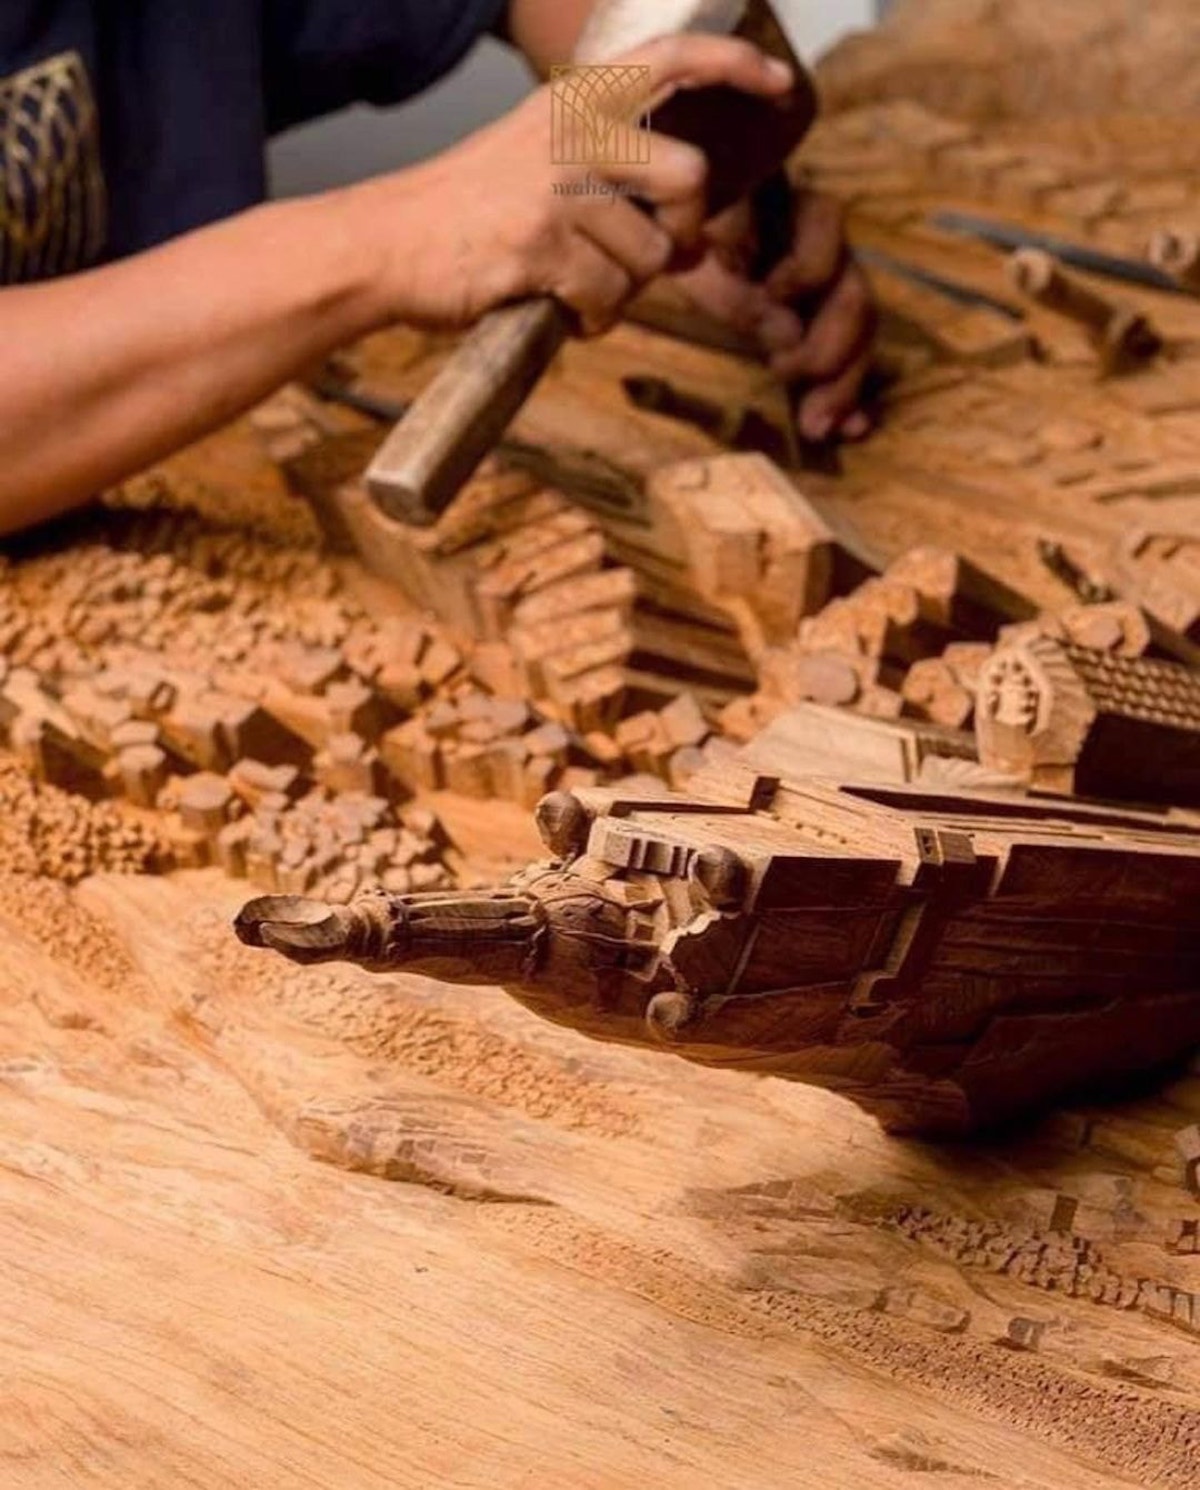 Mahajati’s Intricate Wood Carvings Support Traditional Craft